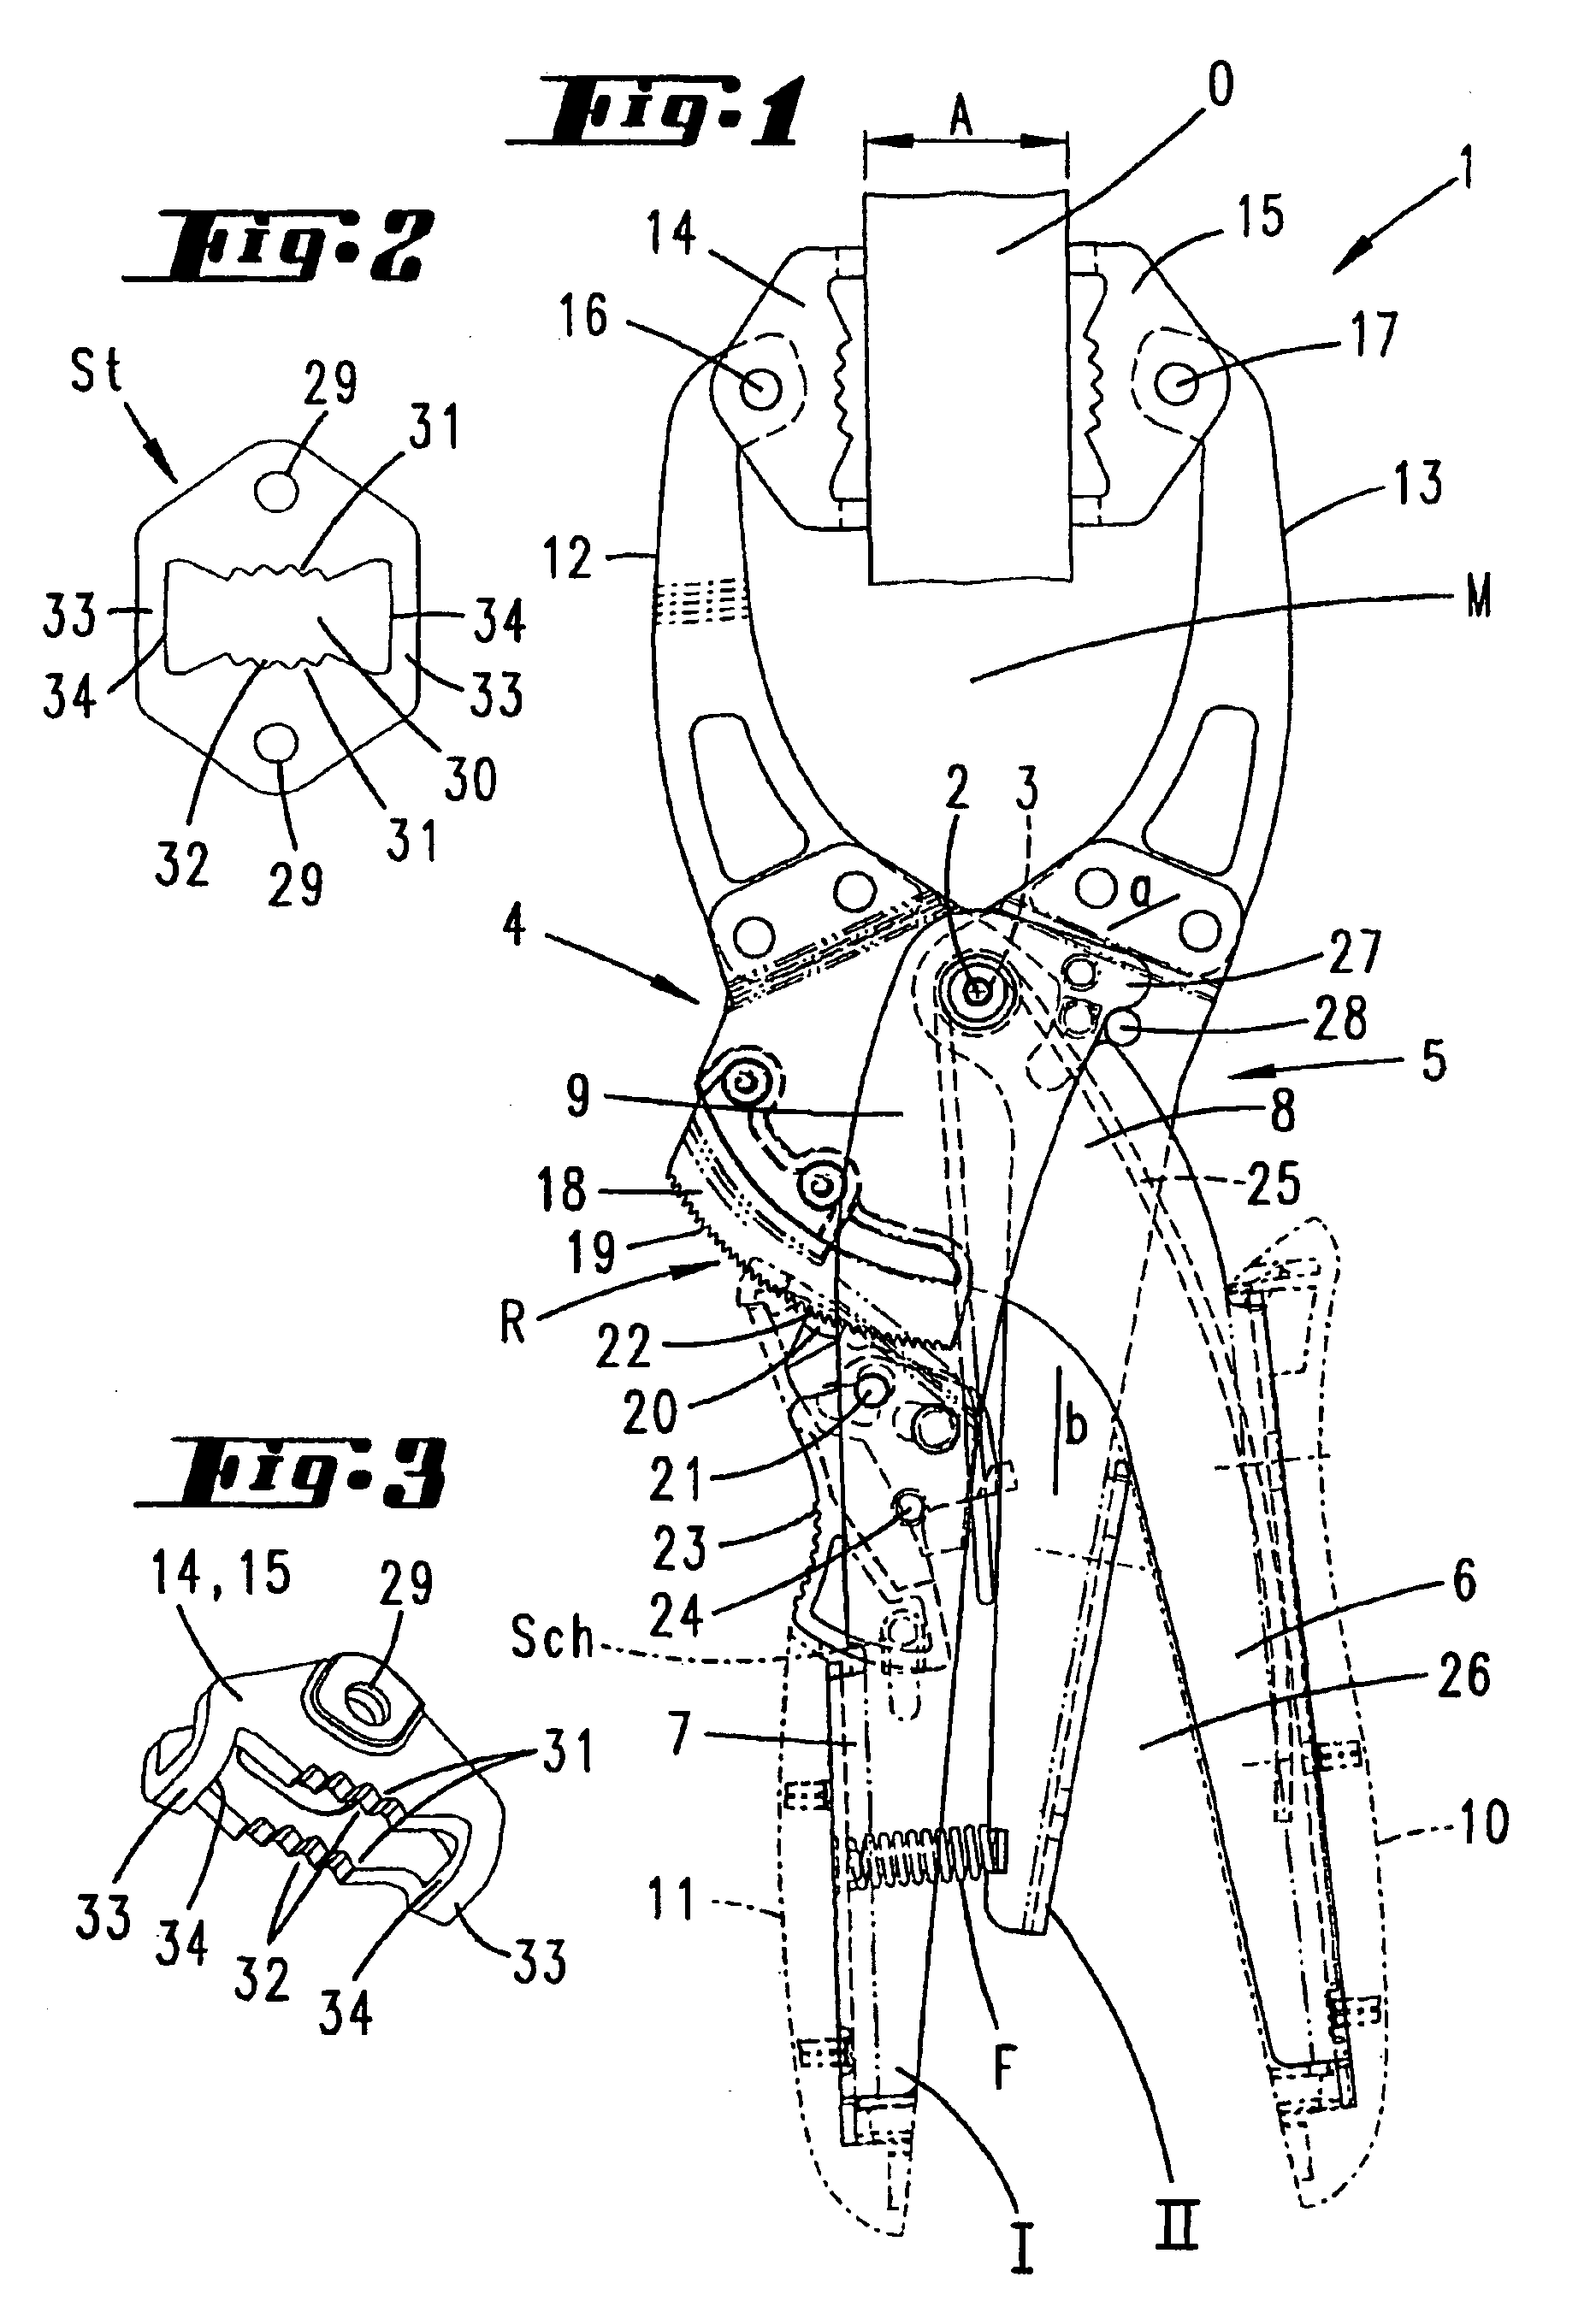 Clamping or expanding pliers